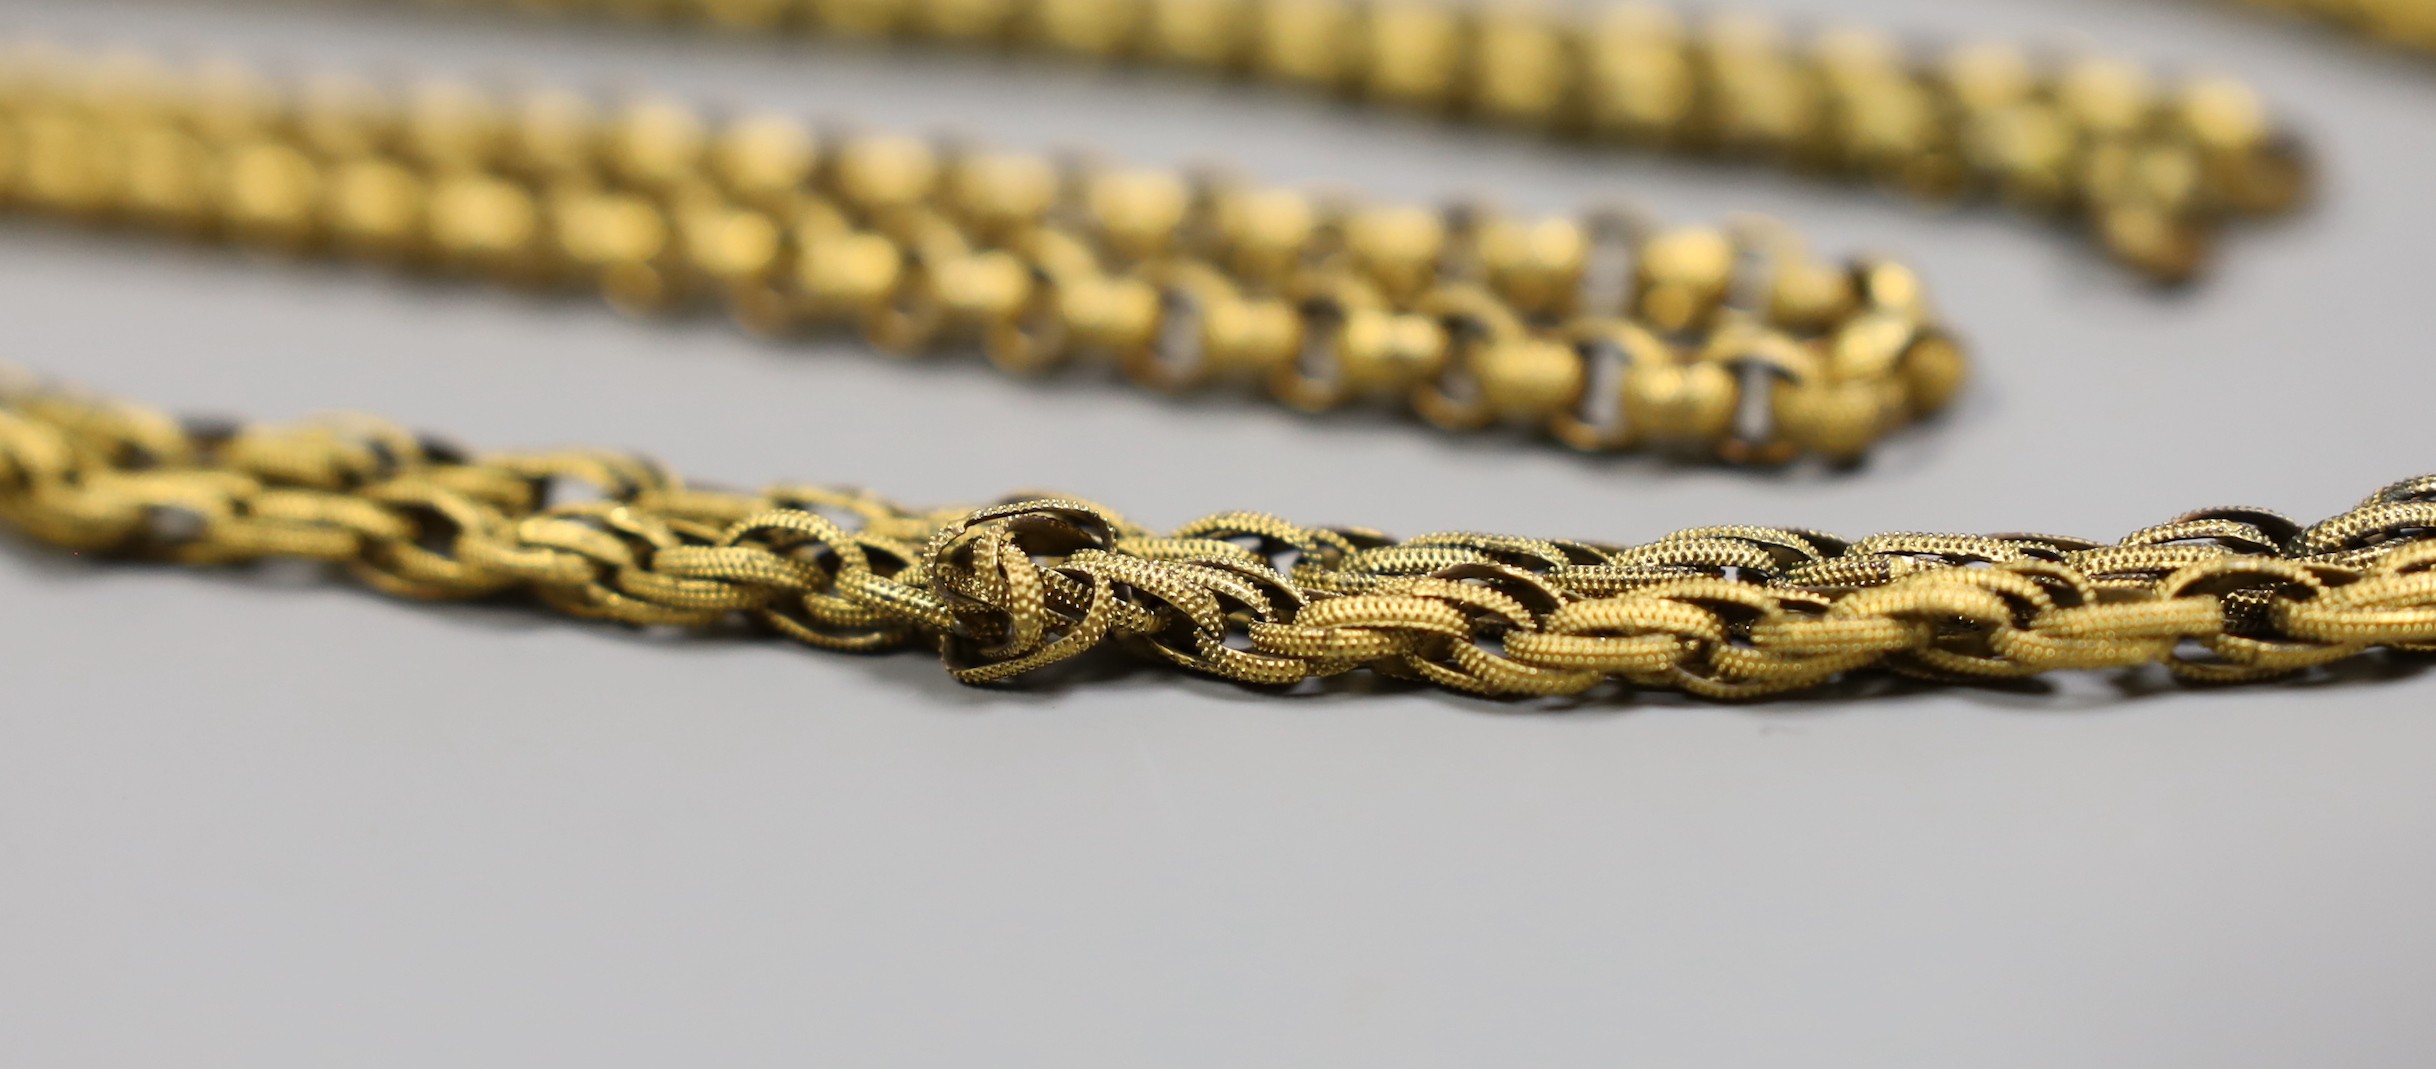 Two 19th century pinchbeck guard chains, longest 118 cm(a.f.)